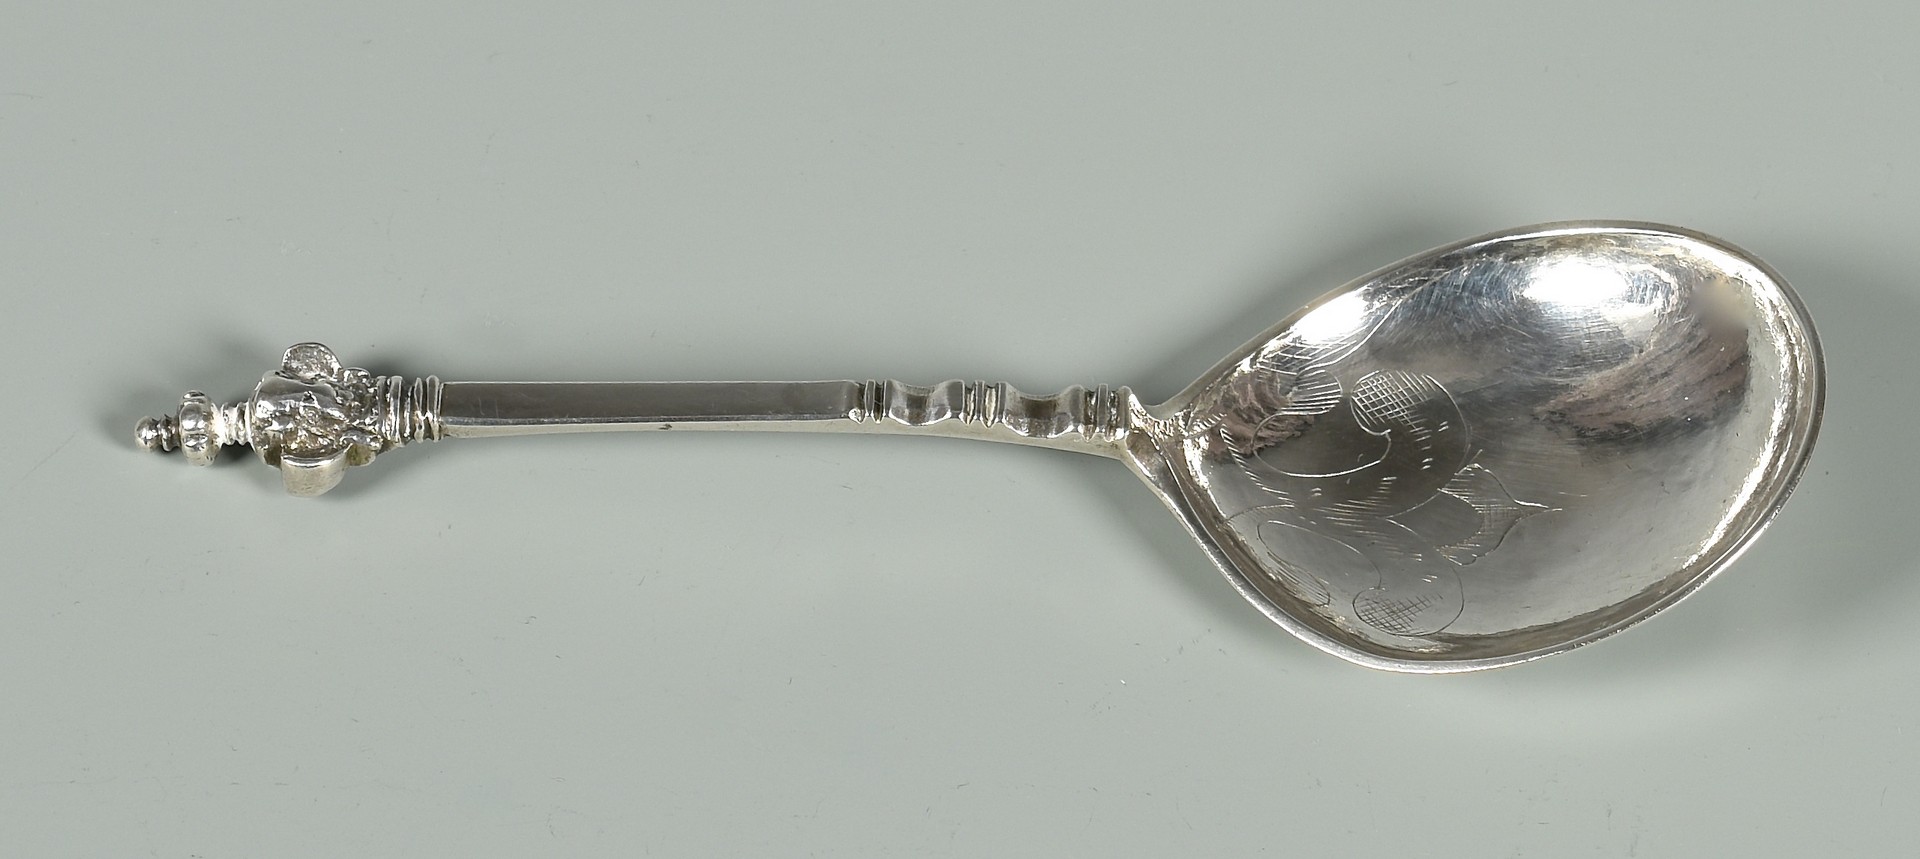 Lot 47: 17th c. Silver Cup, Anointing Spoon